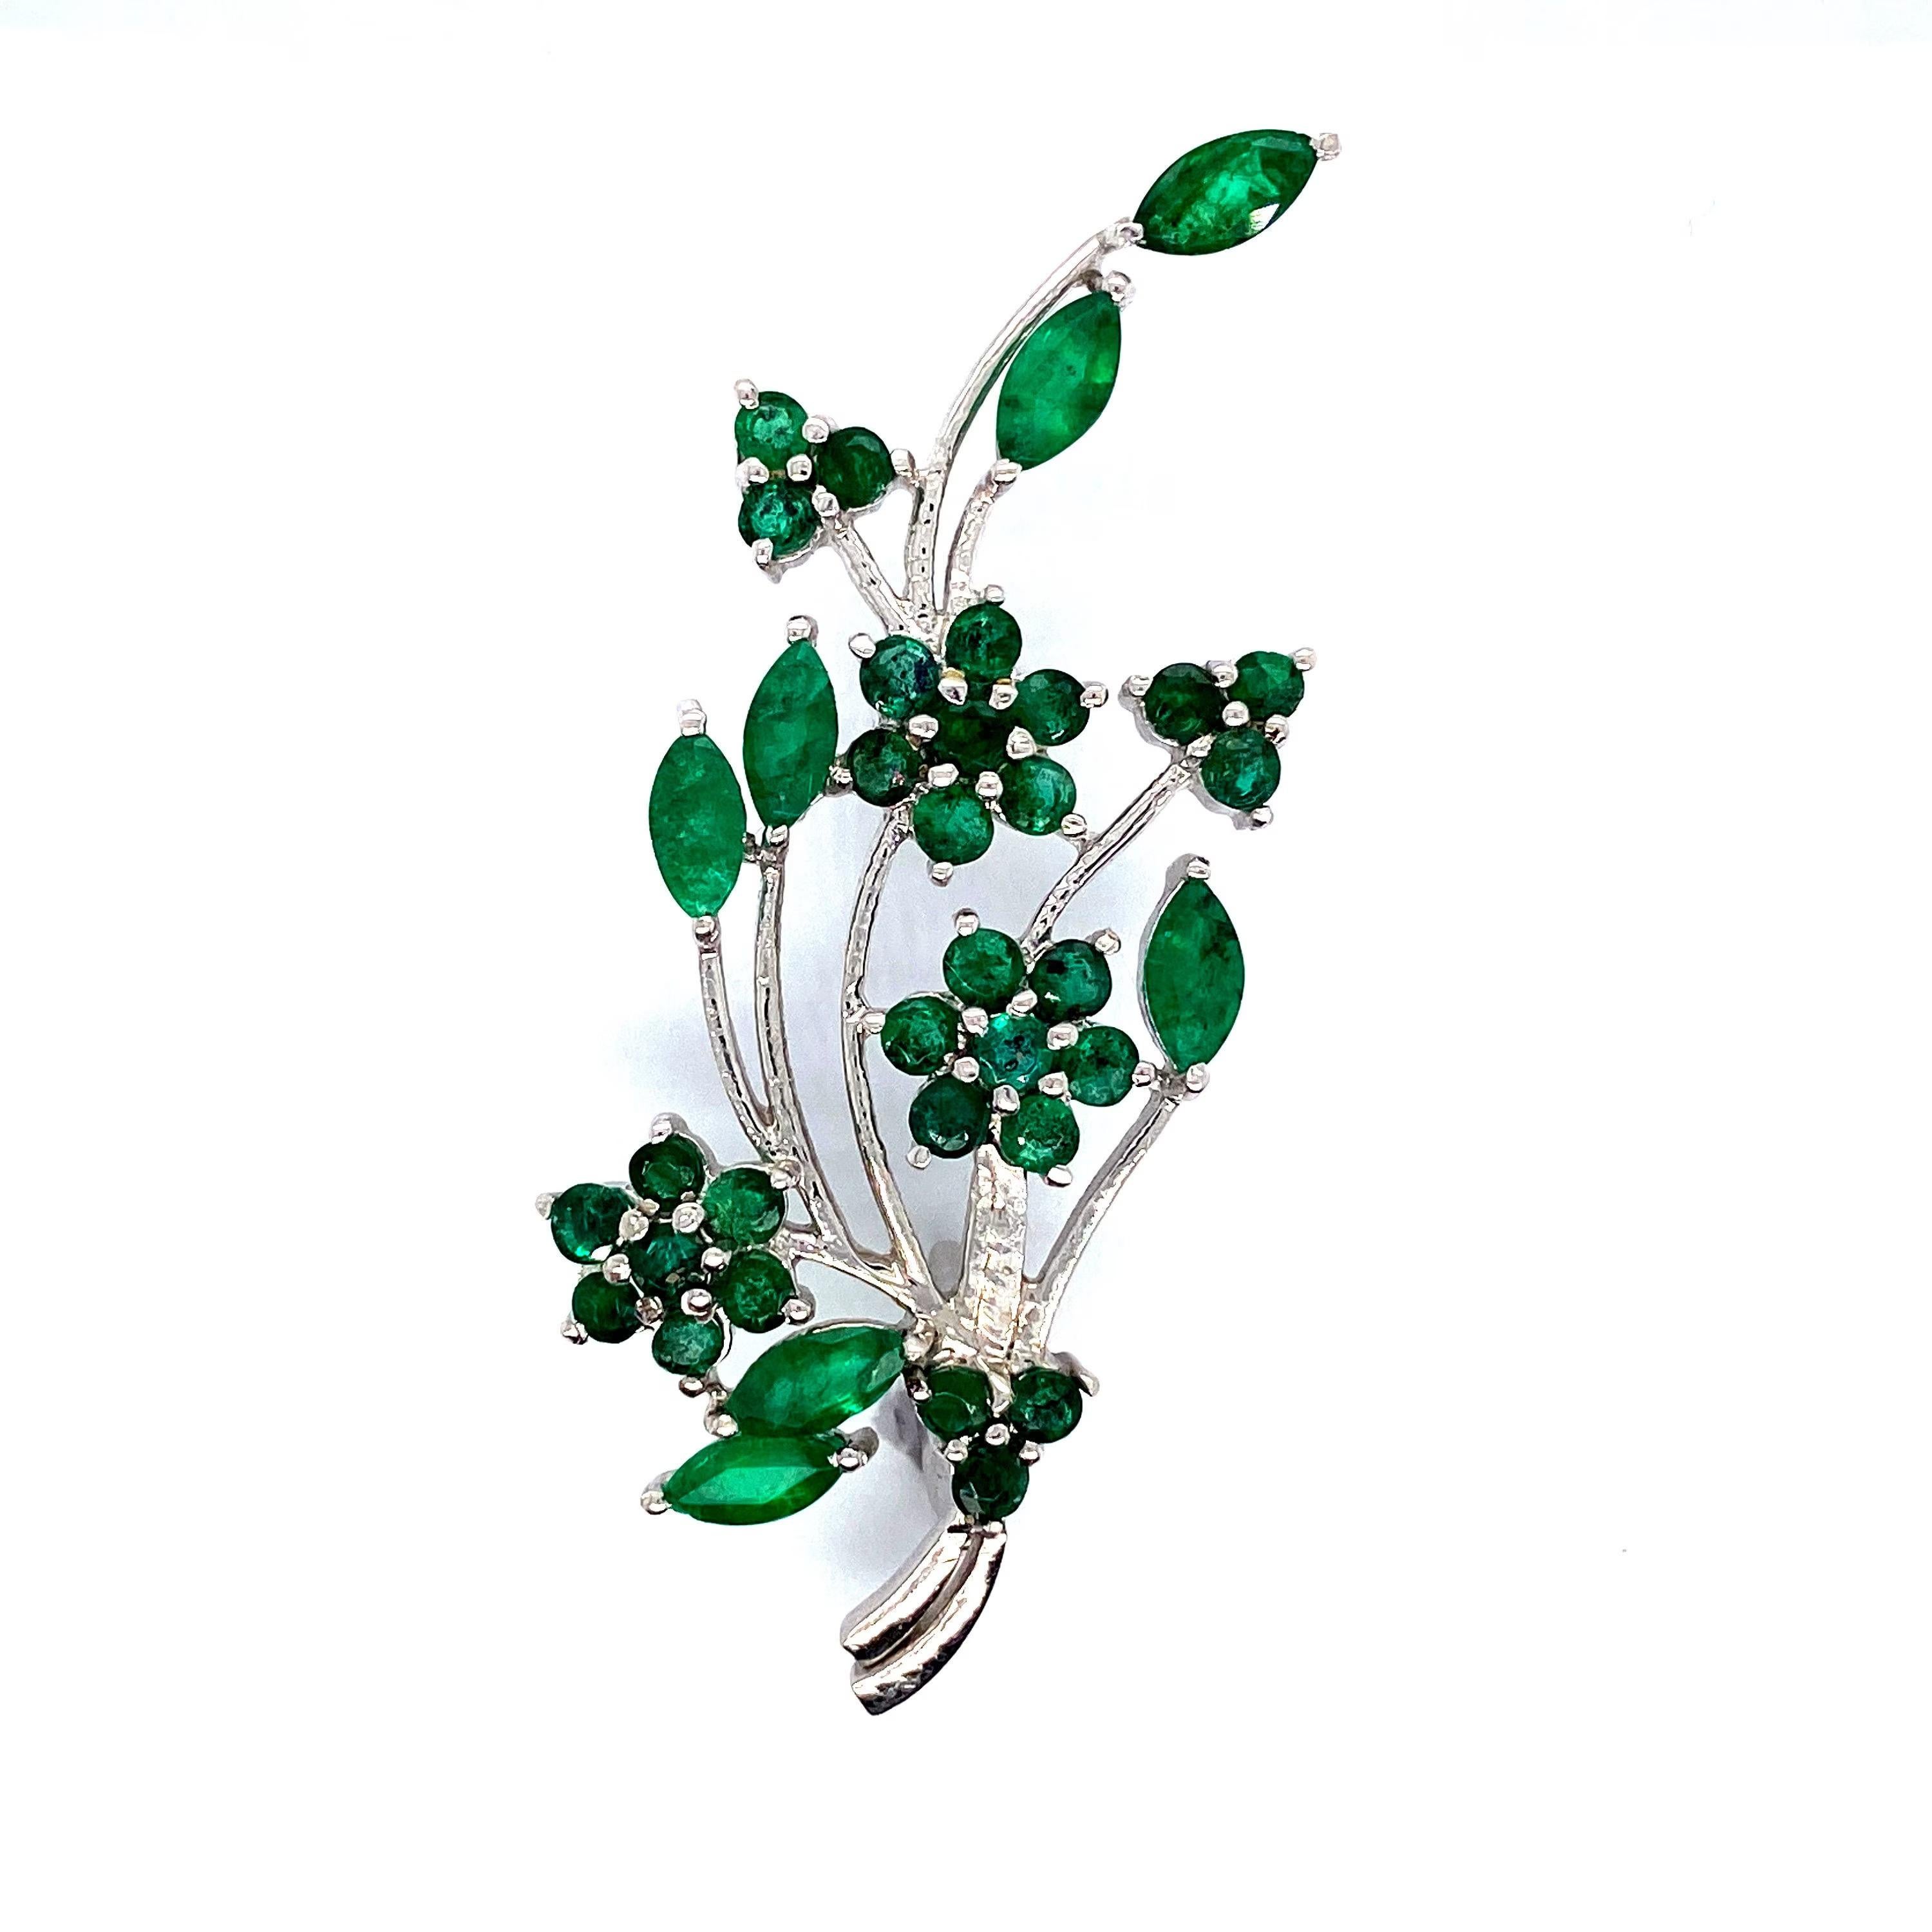 This Handcrafted Real Emerald Floral Unisex Brooch enhances your attire and is perfect for adding a touch of elegance and charm to any outfit. Crafted with exquisite craftsmanship and adorned with dazzling emerald which enhances communication skills